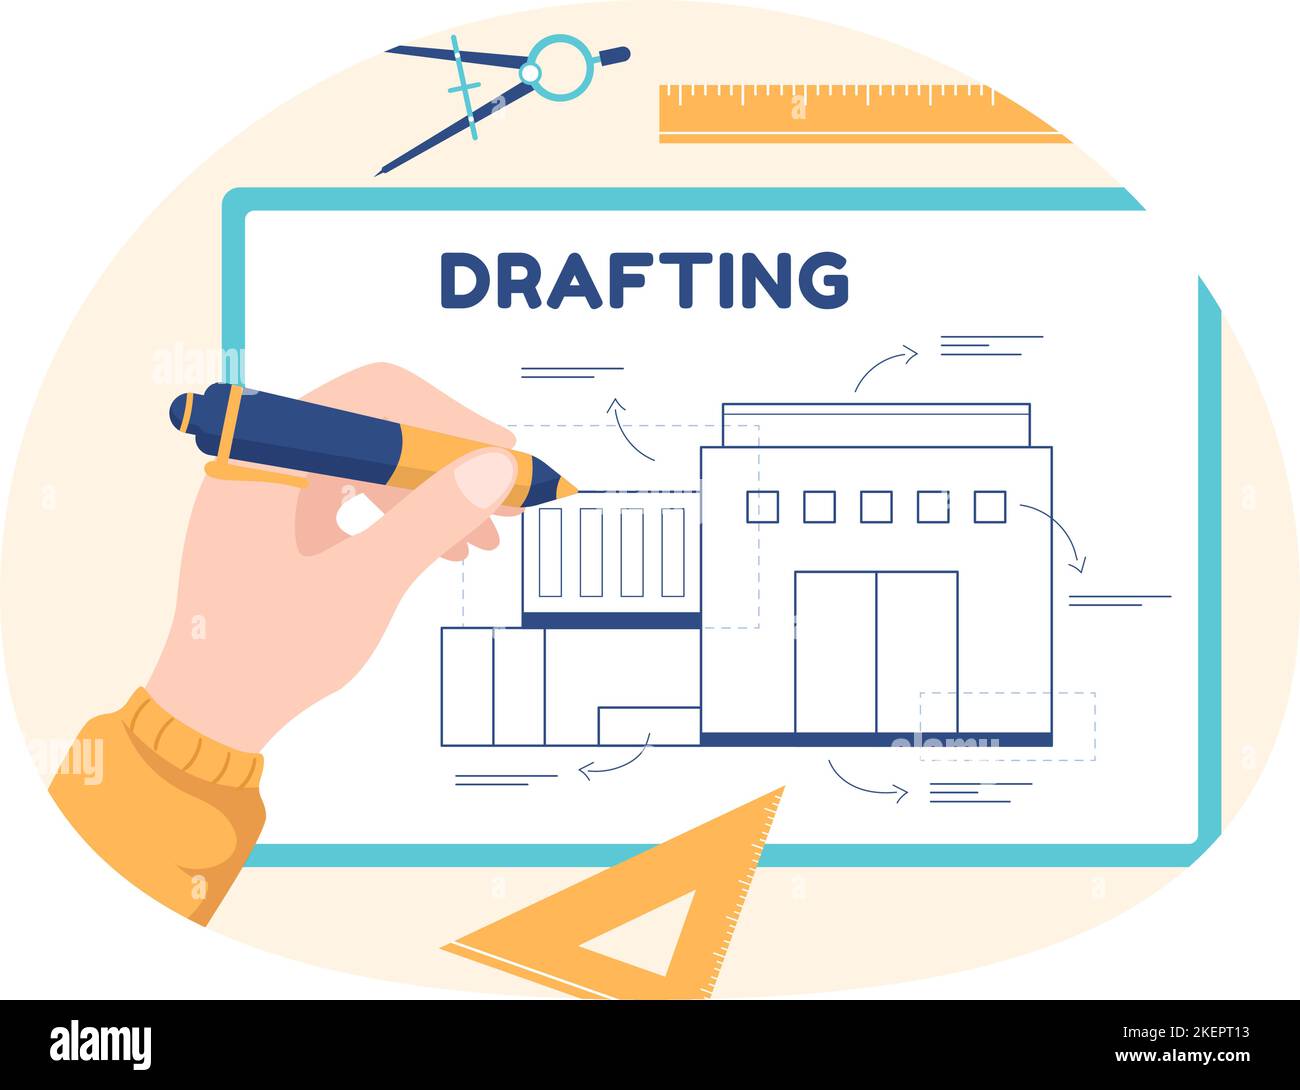 Drafting, Engineer or Architect Working on Drawing Board Projecting and Draft in Flat Cartoon Hand Drawn Templates Illustration Stock Vector